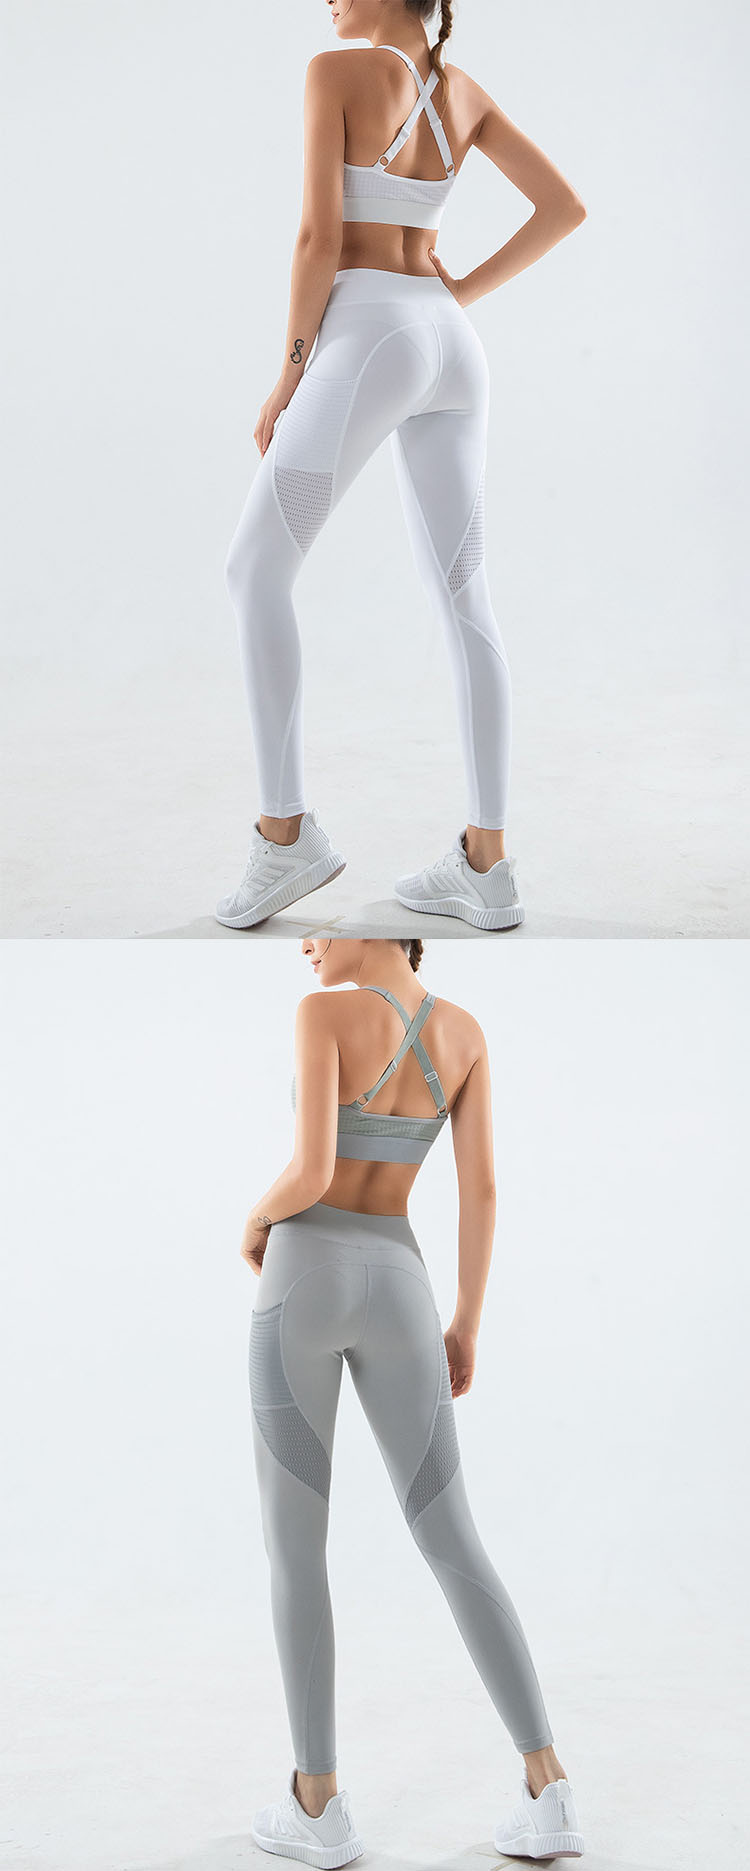 Add hip line design, lift buttocks carefully, and shape your body.